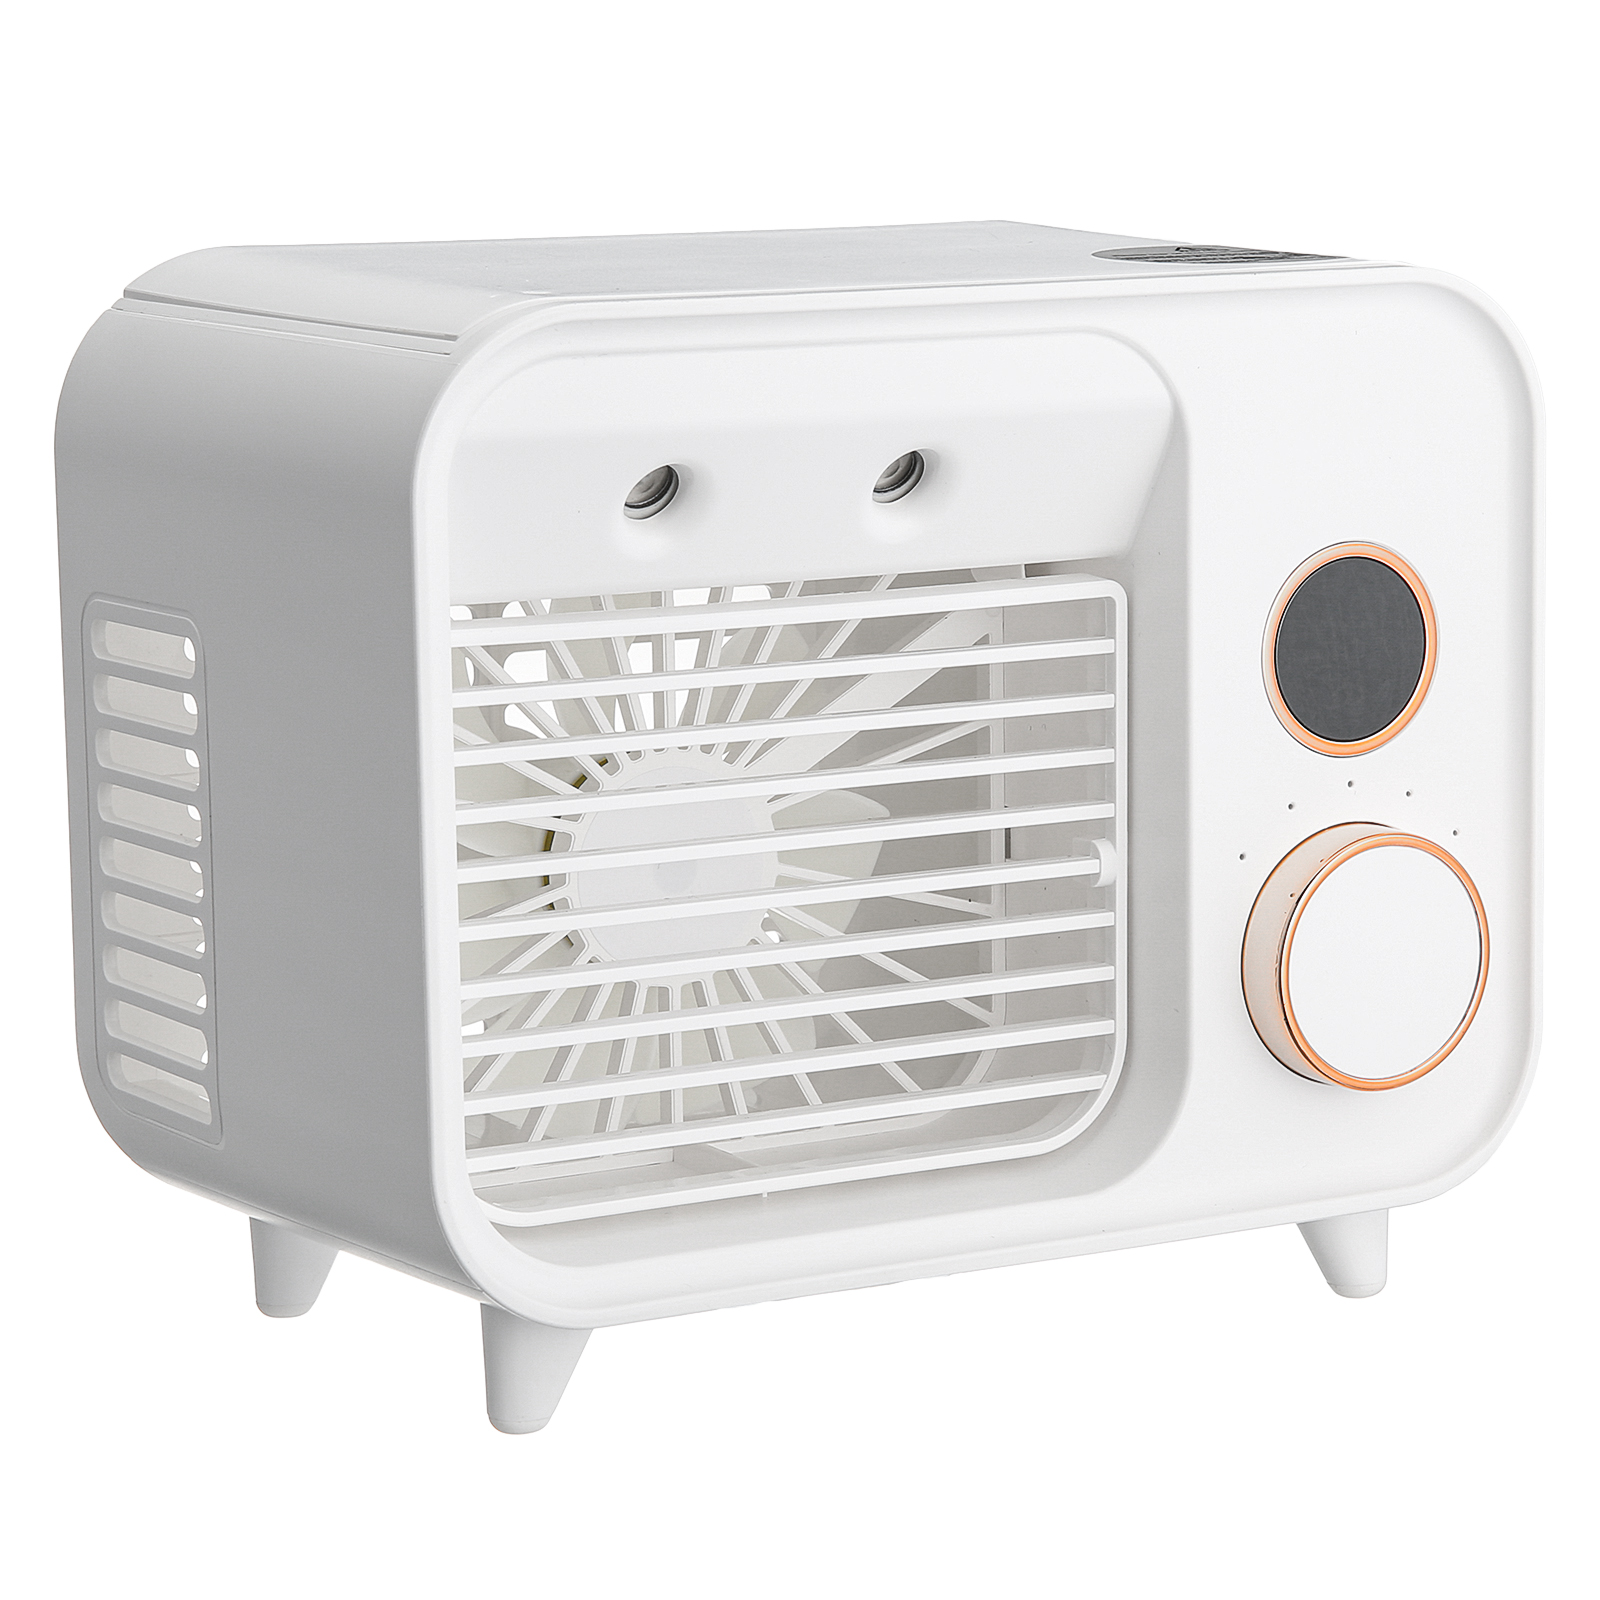 Jeteven-5-in-1-Portable-Air-Cooler-Fan-Humidifiers-5-Wind-Speeds-2000mAh-Battery-with-LED-Night-Ligh-1897155-10